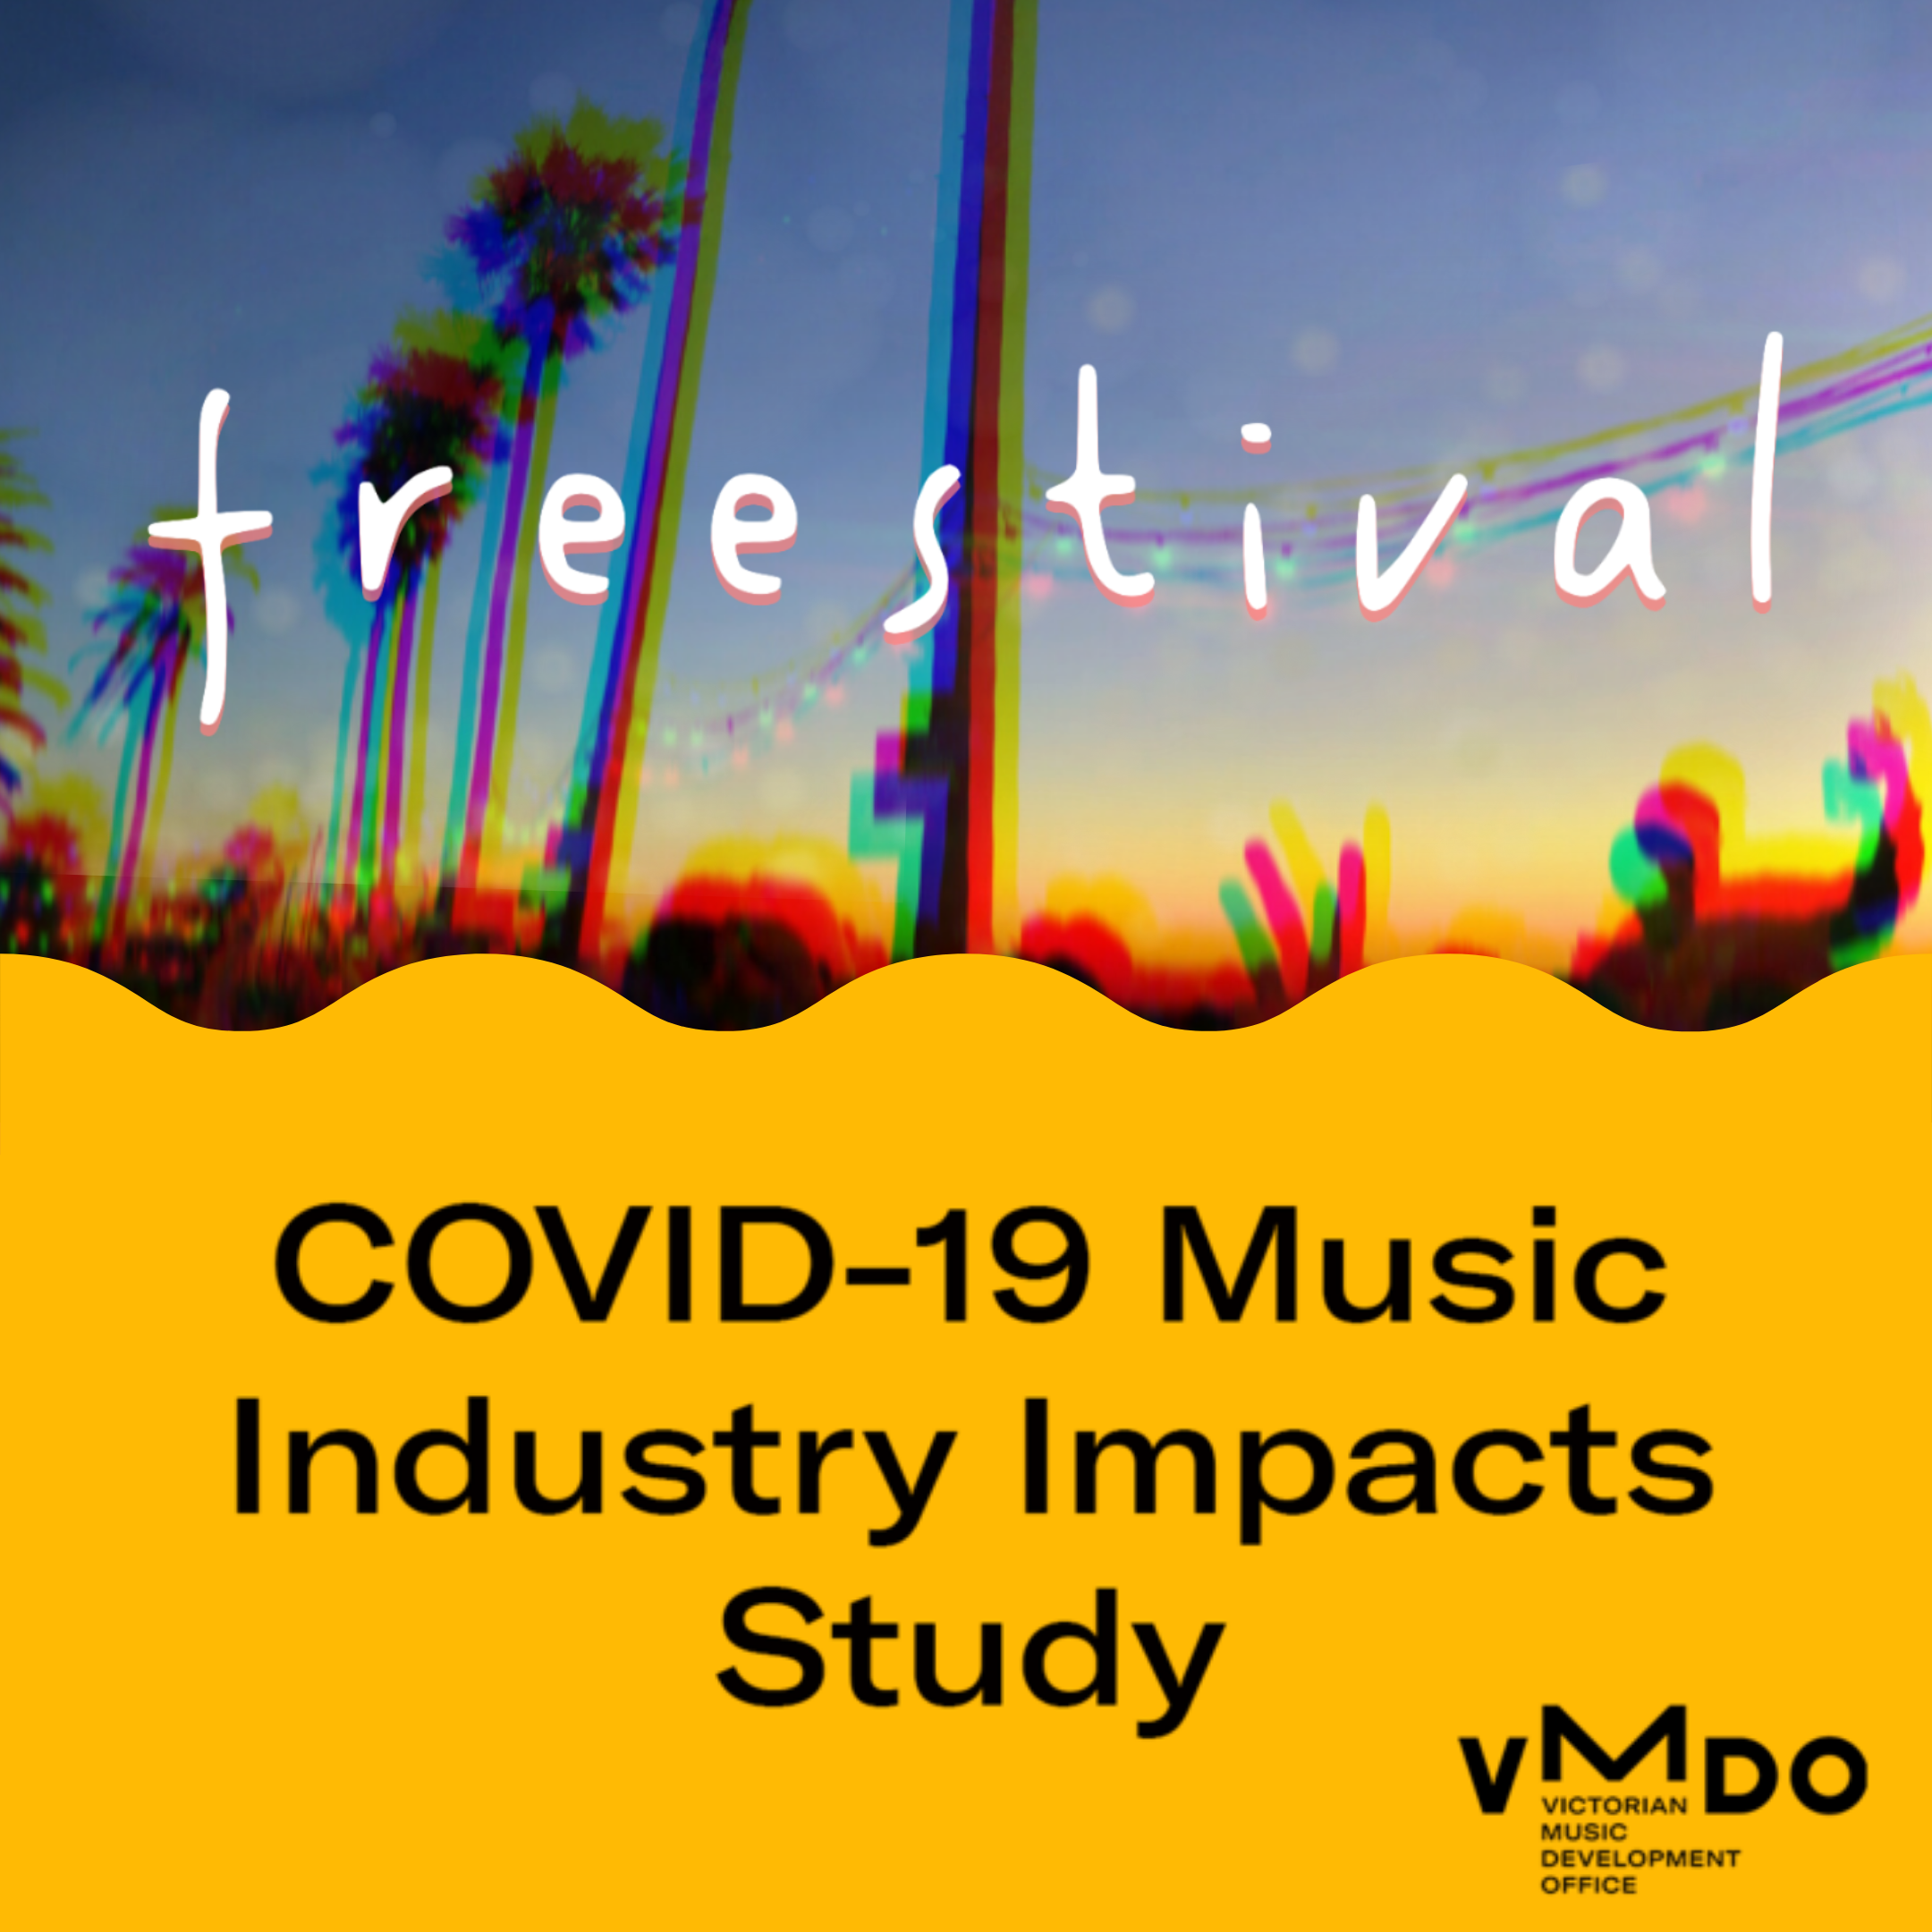 Dr Catherine Strong - COVID-19 Music Industry Impacts Survey | freestival